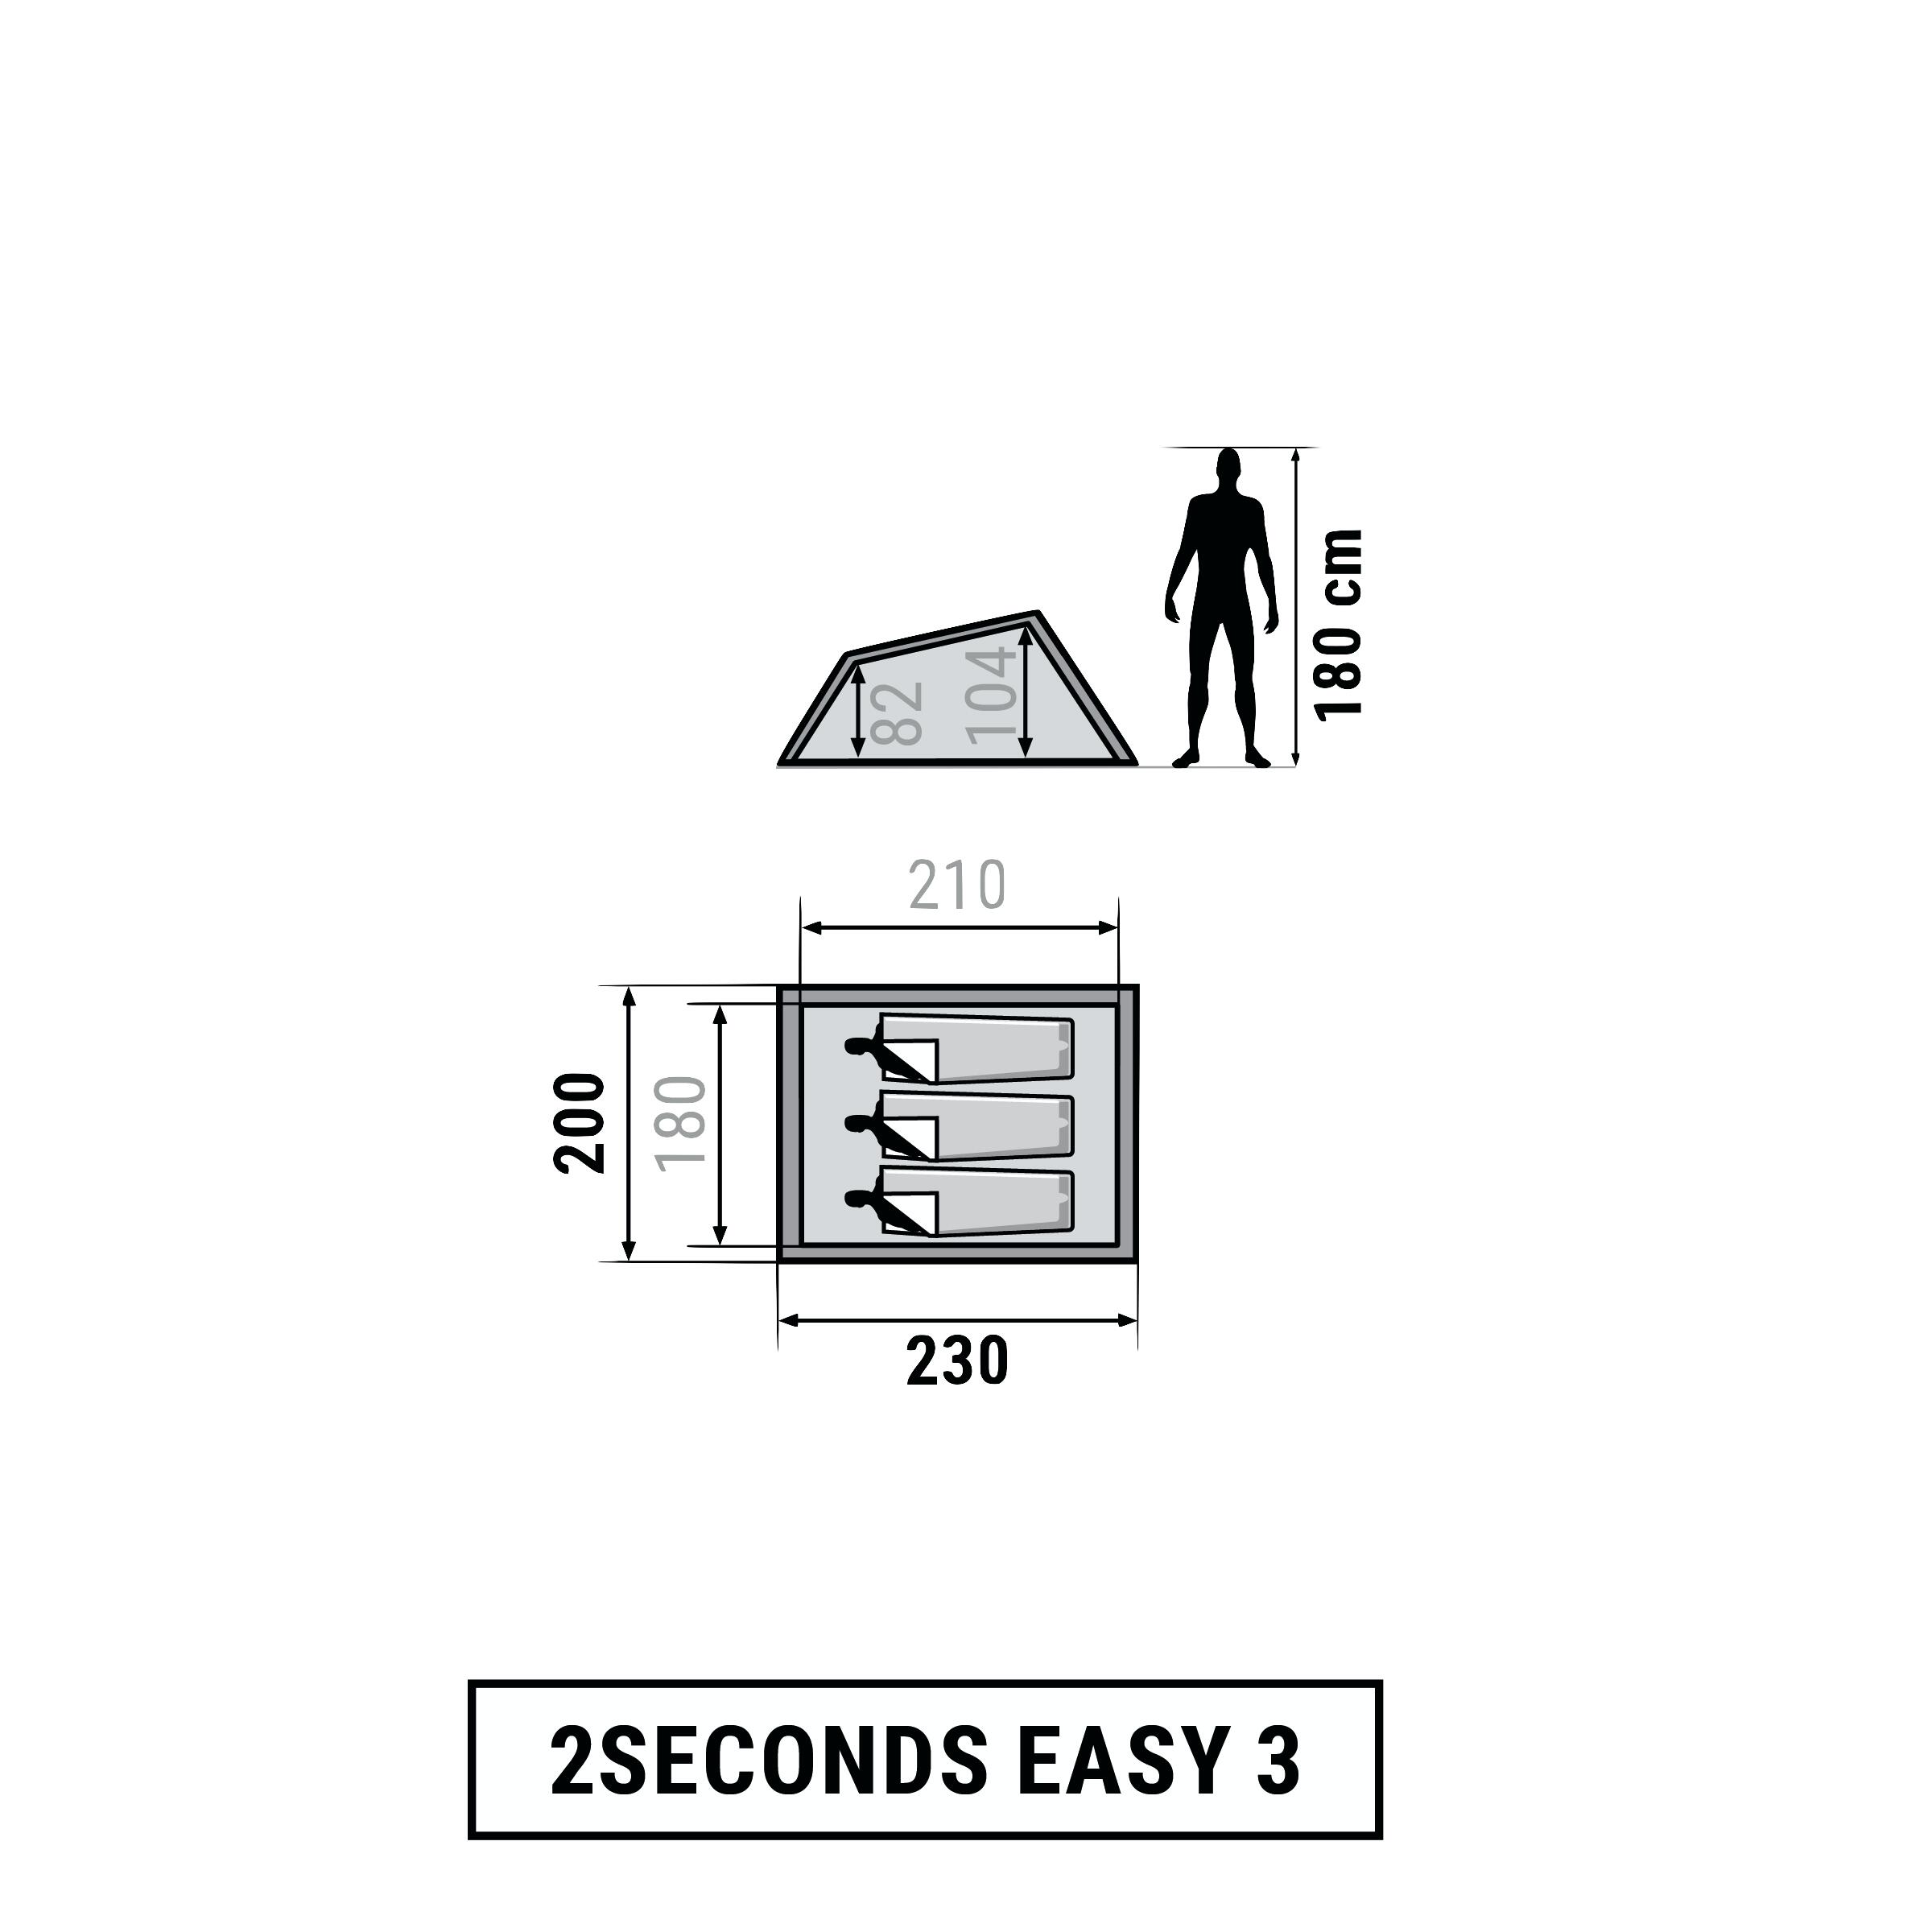 Camping tent - 2 SECONDS - 3-person 11/26